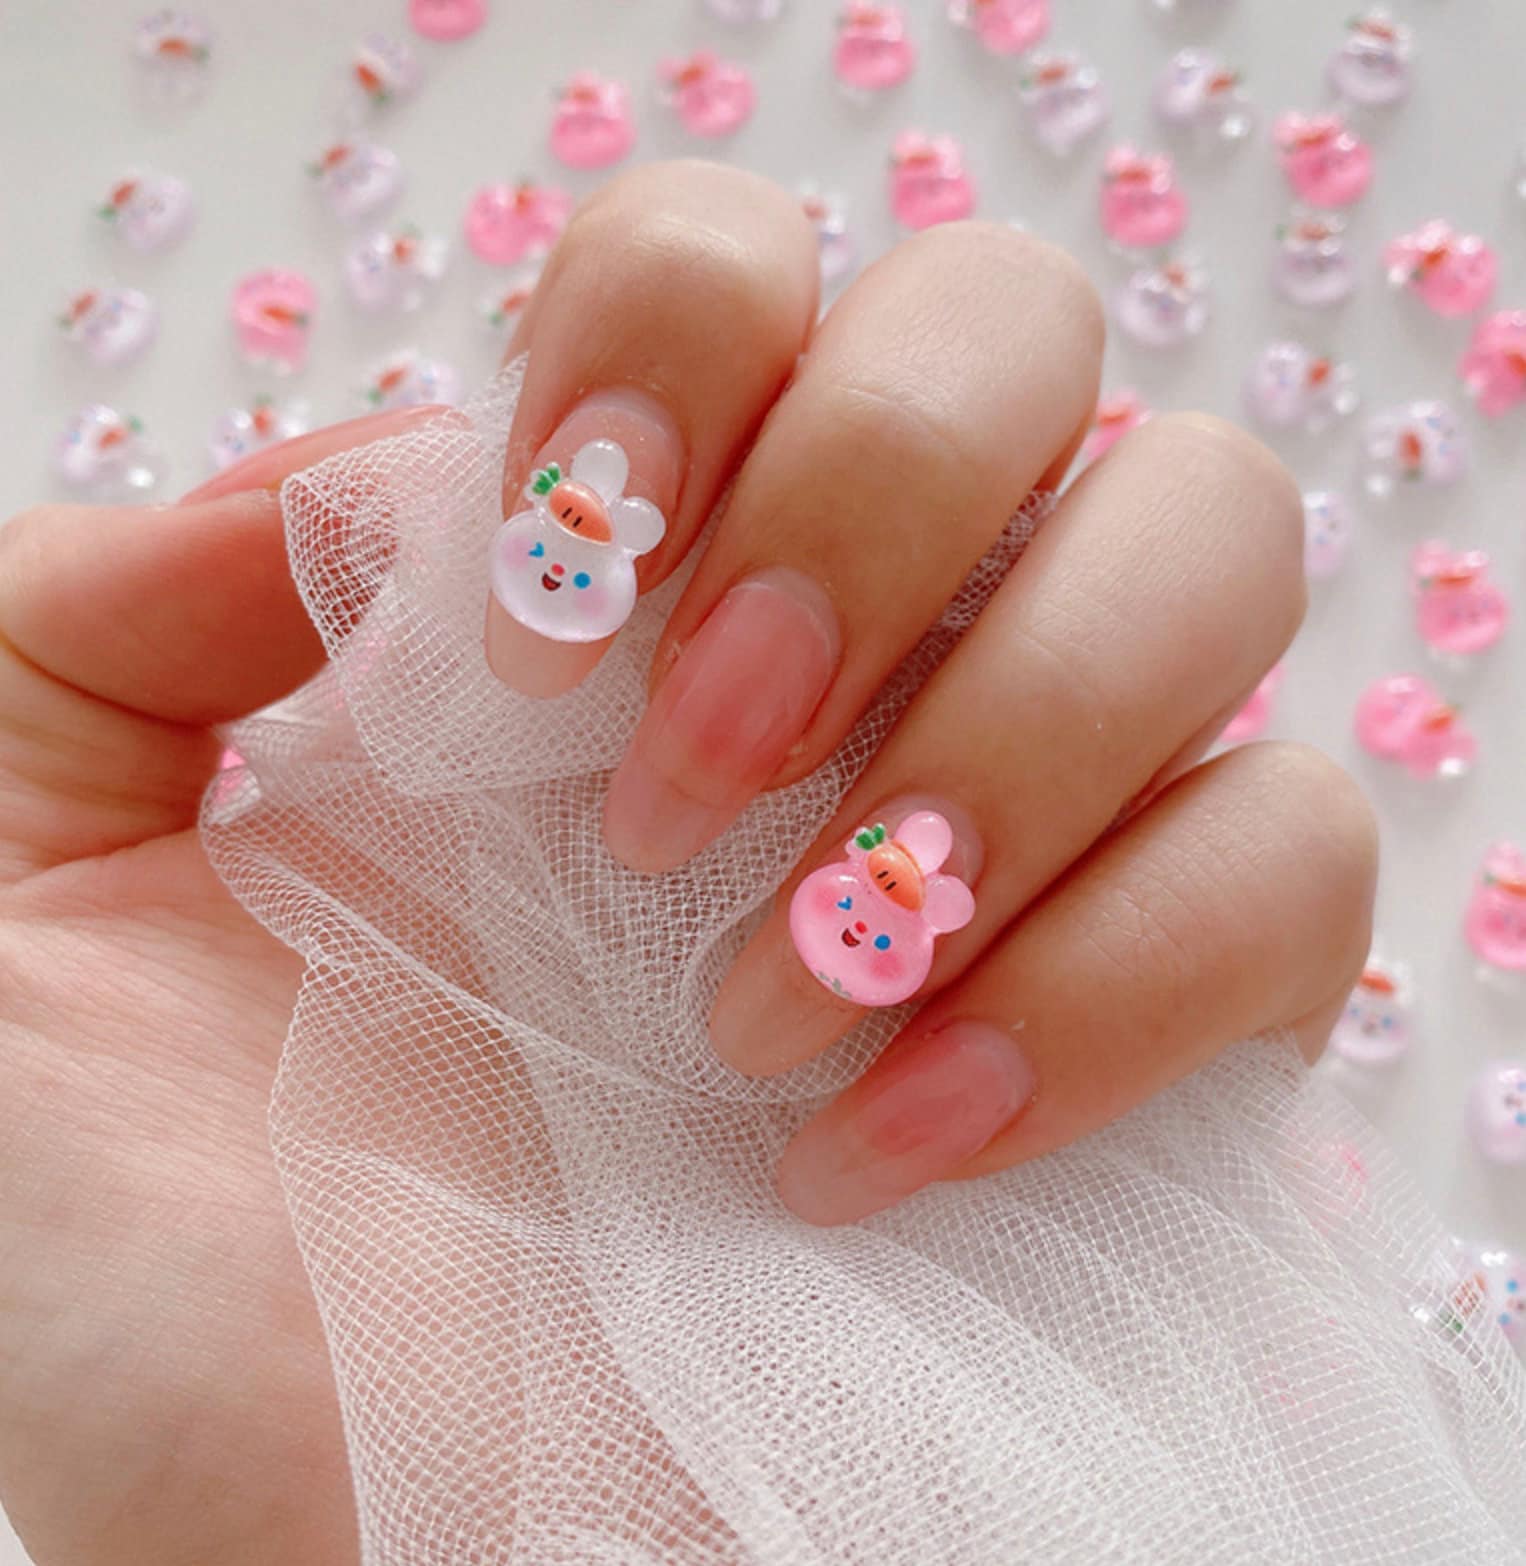 Cute Chubby Bunny with Carrot, Animal Themed 3D Nail Art Charms, Decoden, DIY Supplies, Mini Cabochon